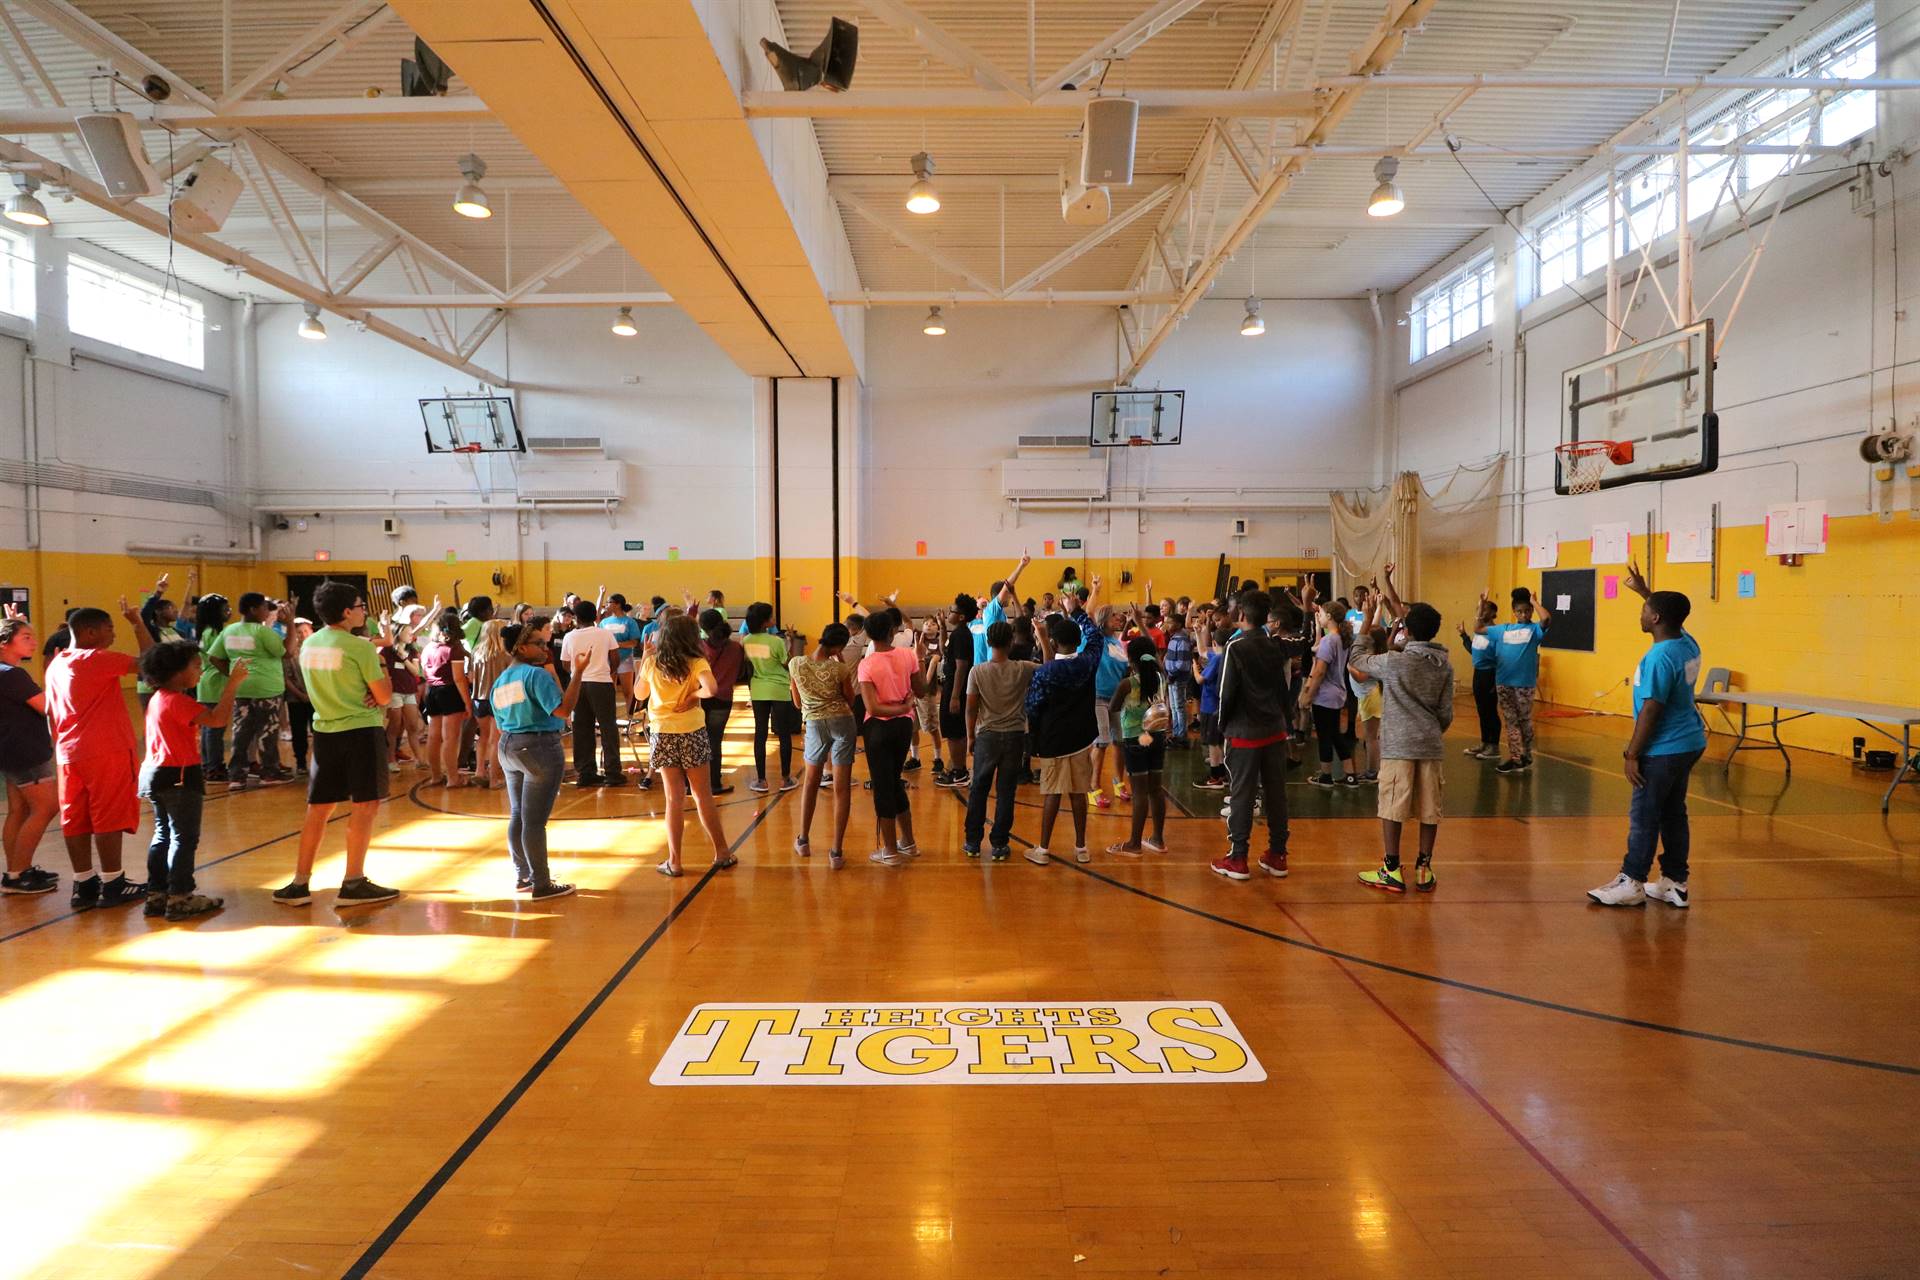 Students gathered on gym floor